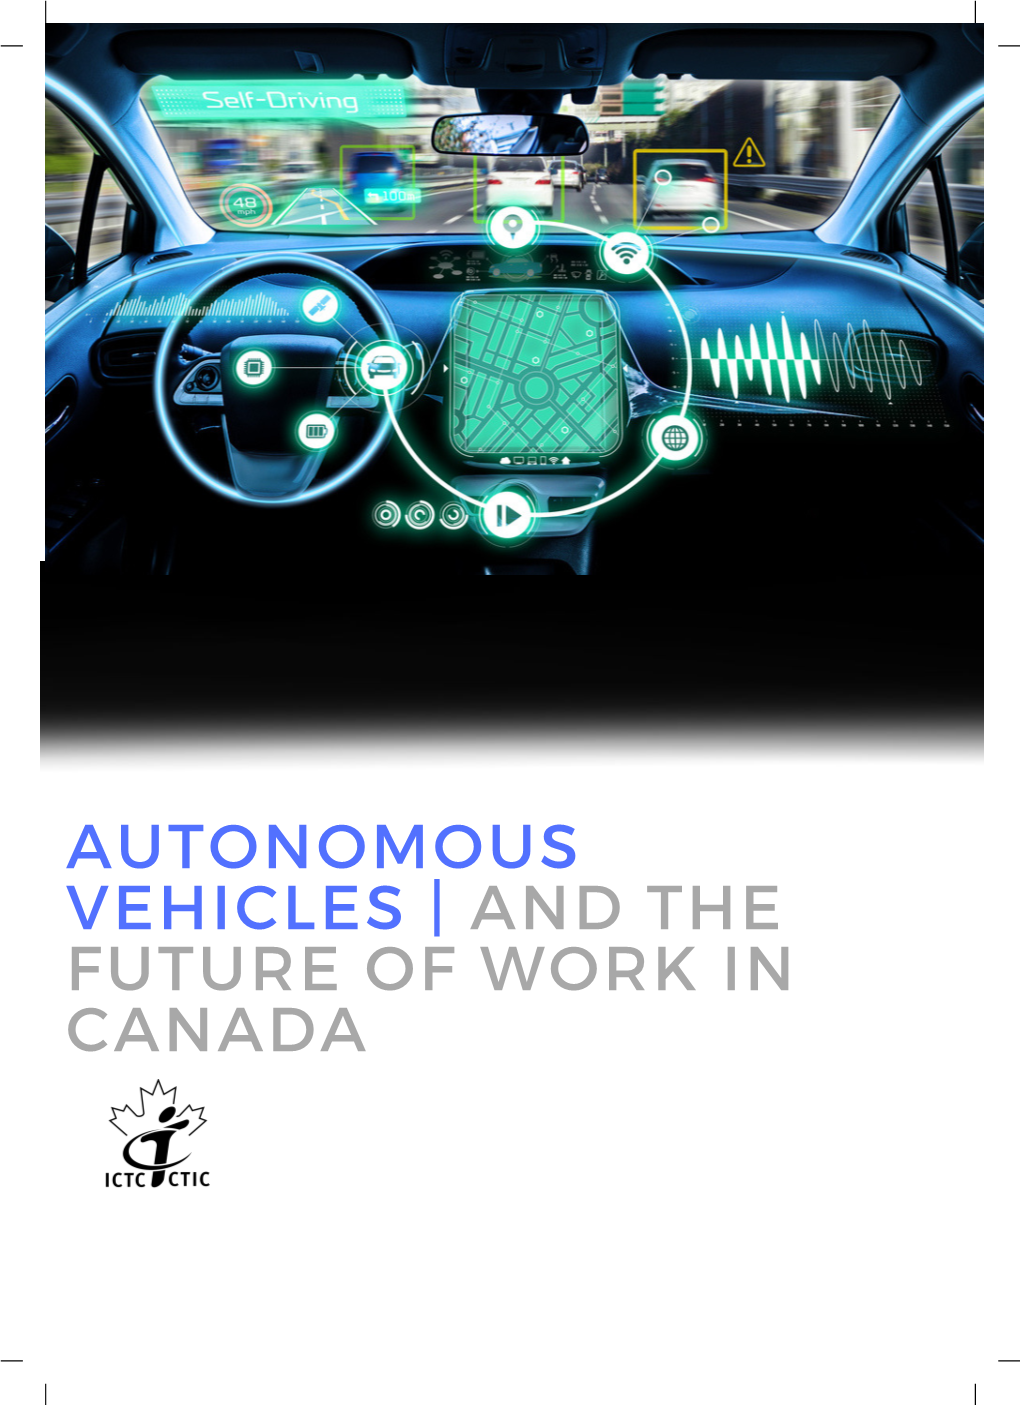 Autonomous Vehicles and the Future of Work in Canada